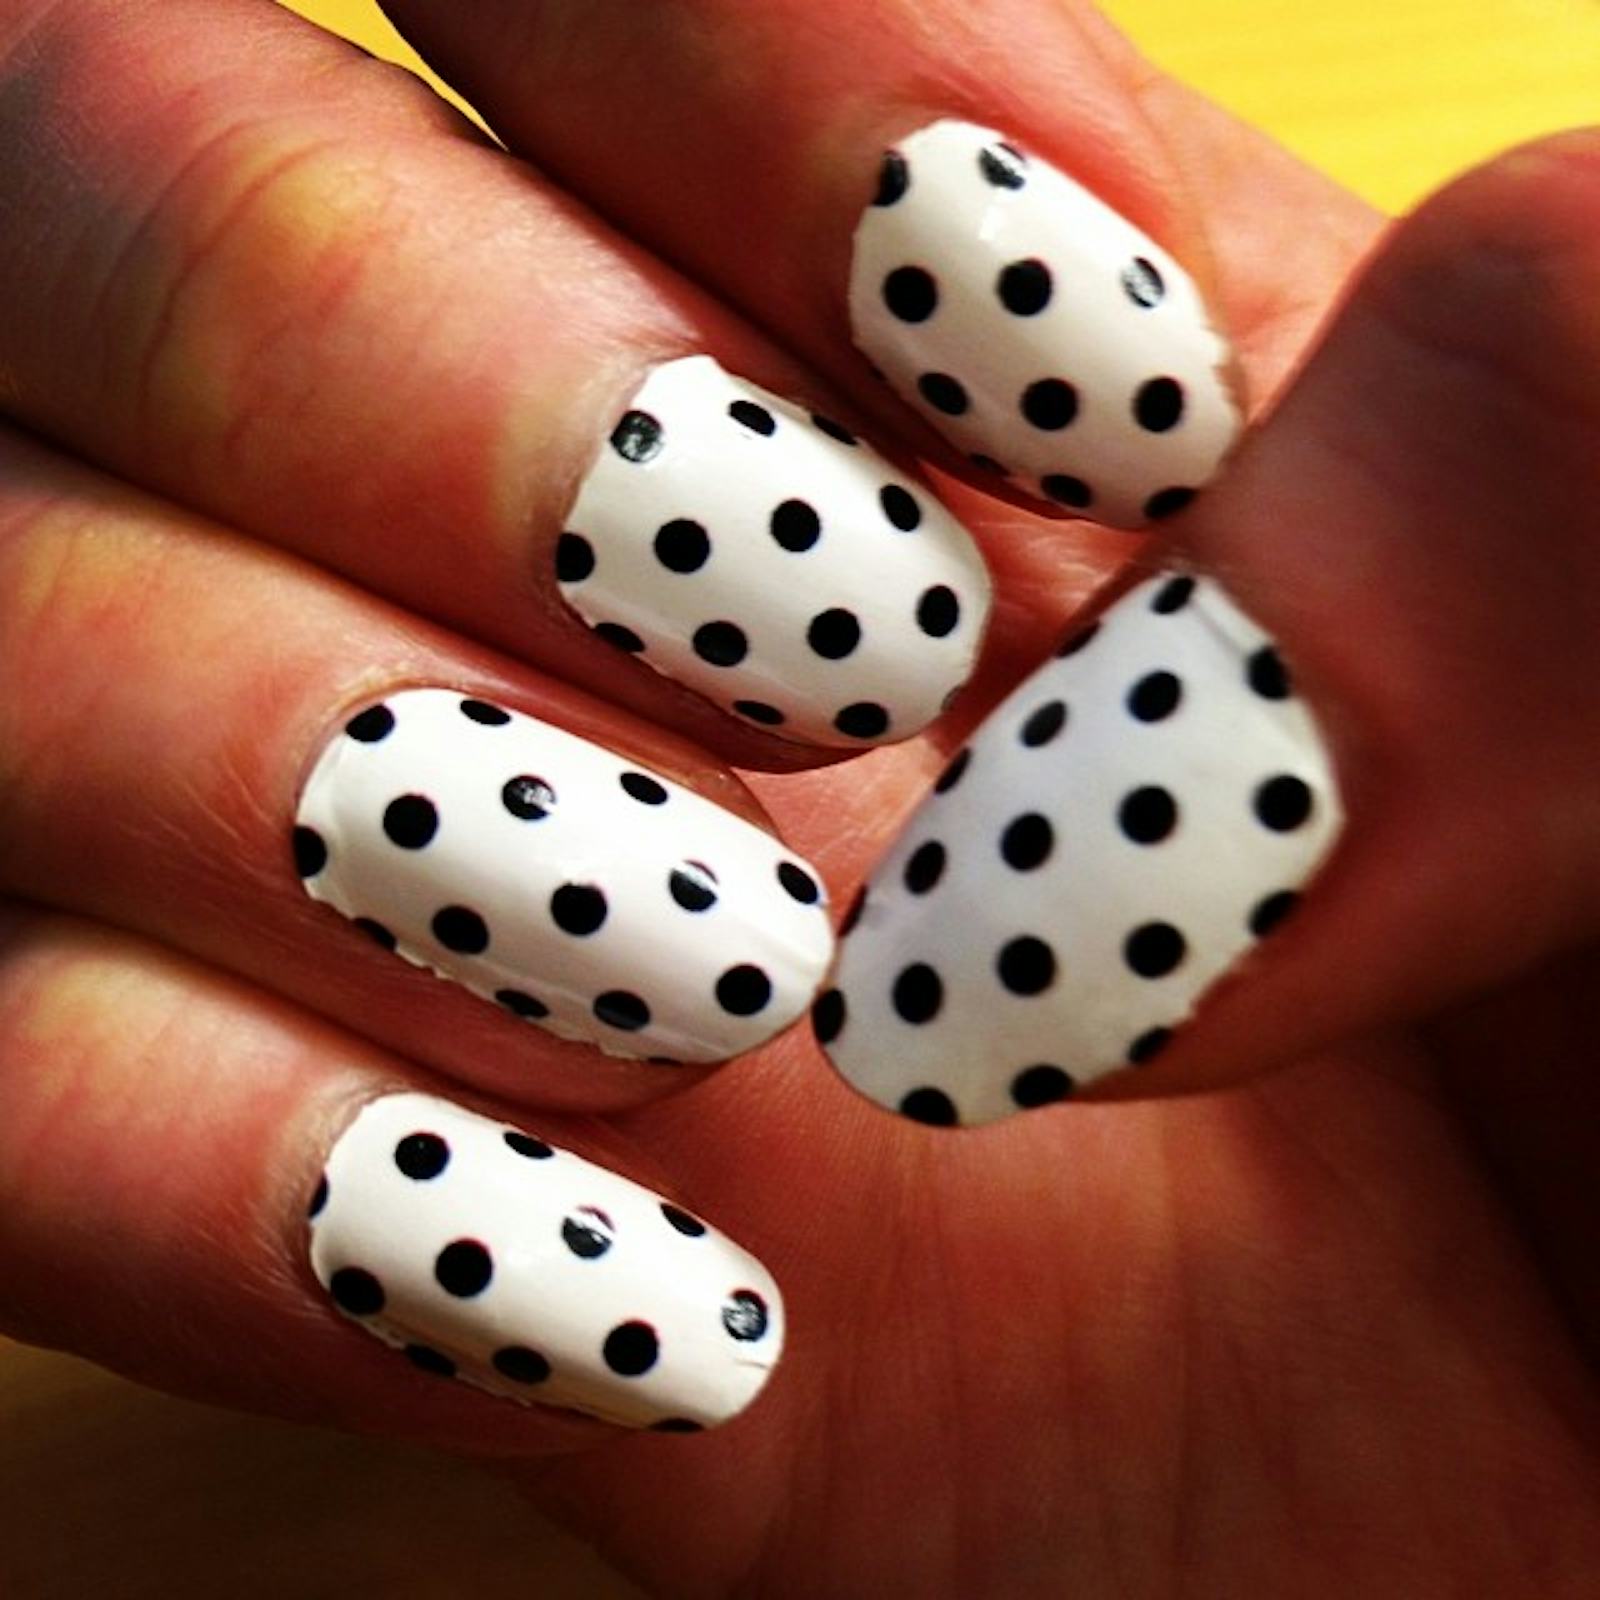 9 Reasons Sally Hansen Nail Stickers Will Change Your Nail Game Forever